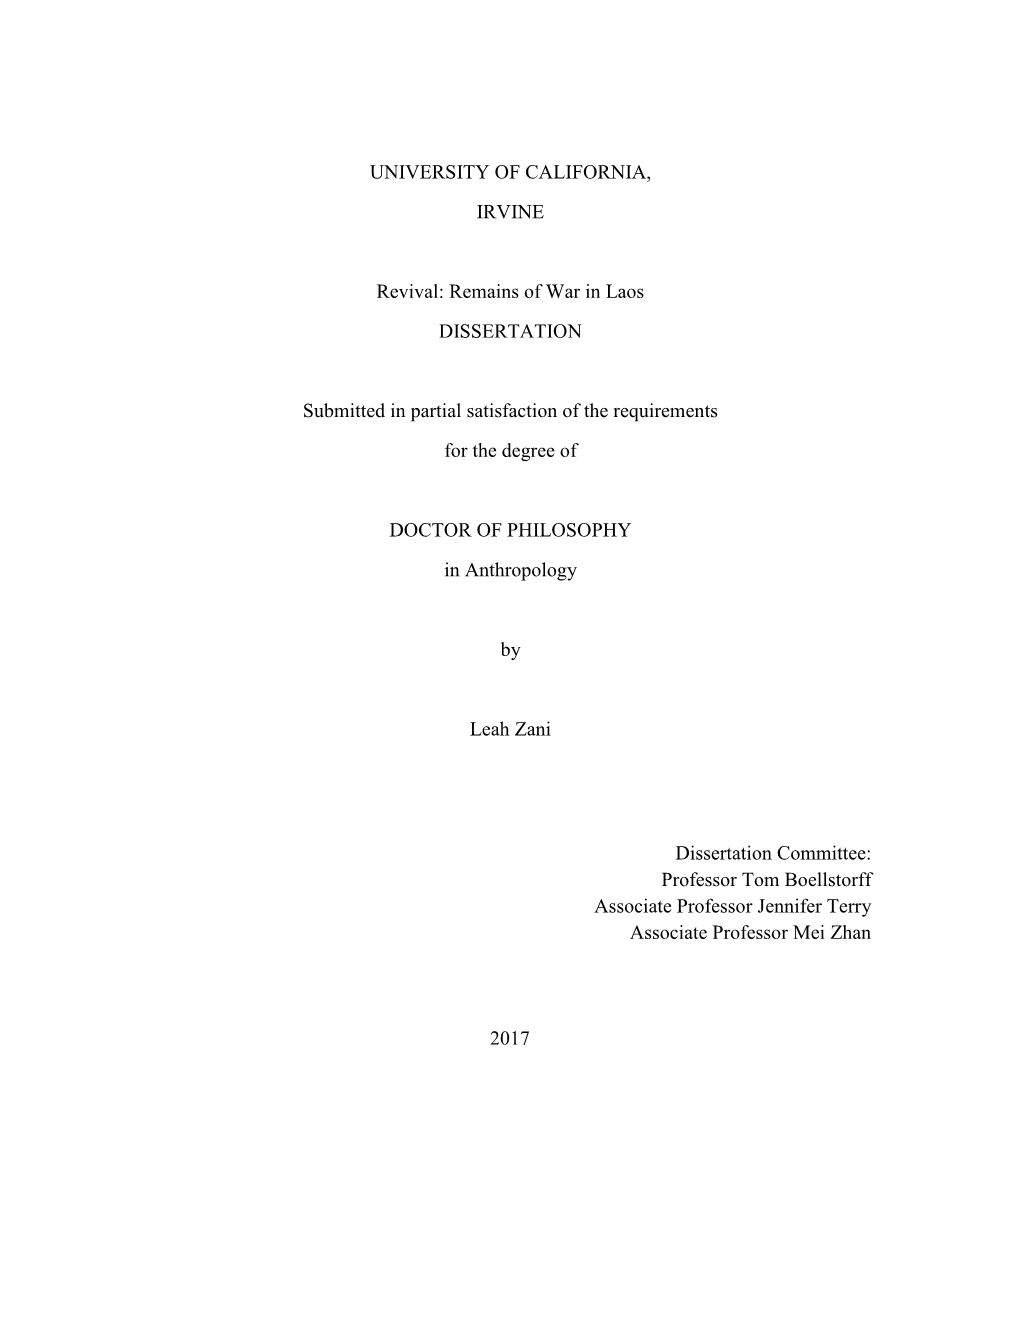 Remains of War in Laos DISSERTATION Submitted In